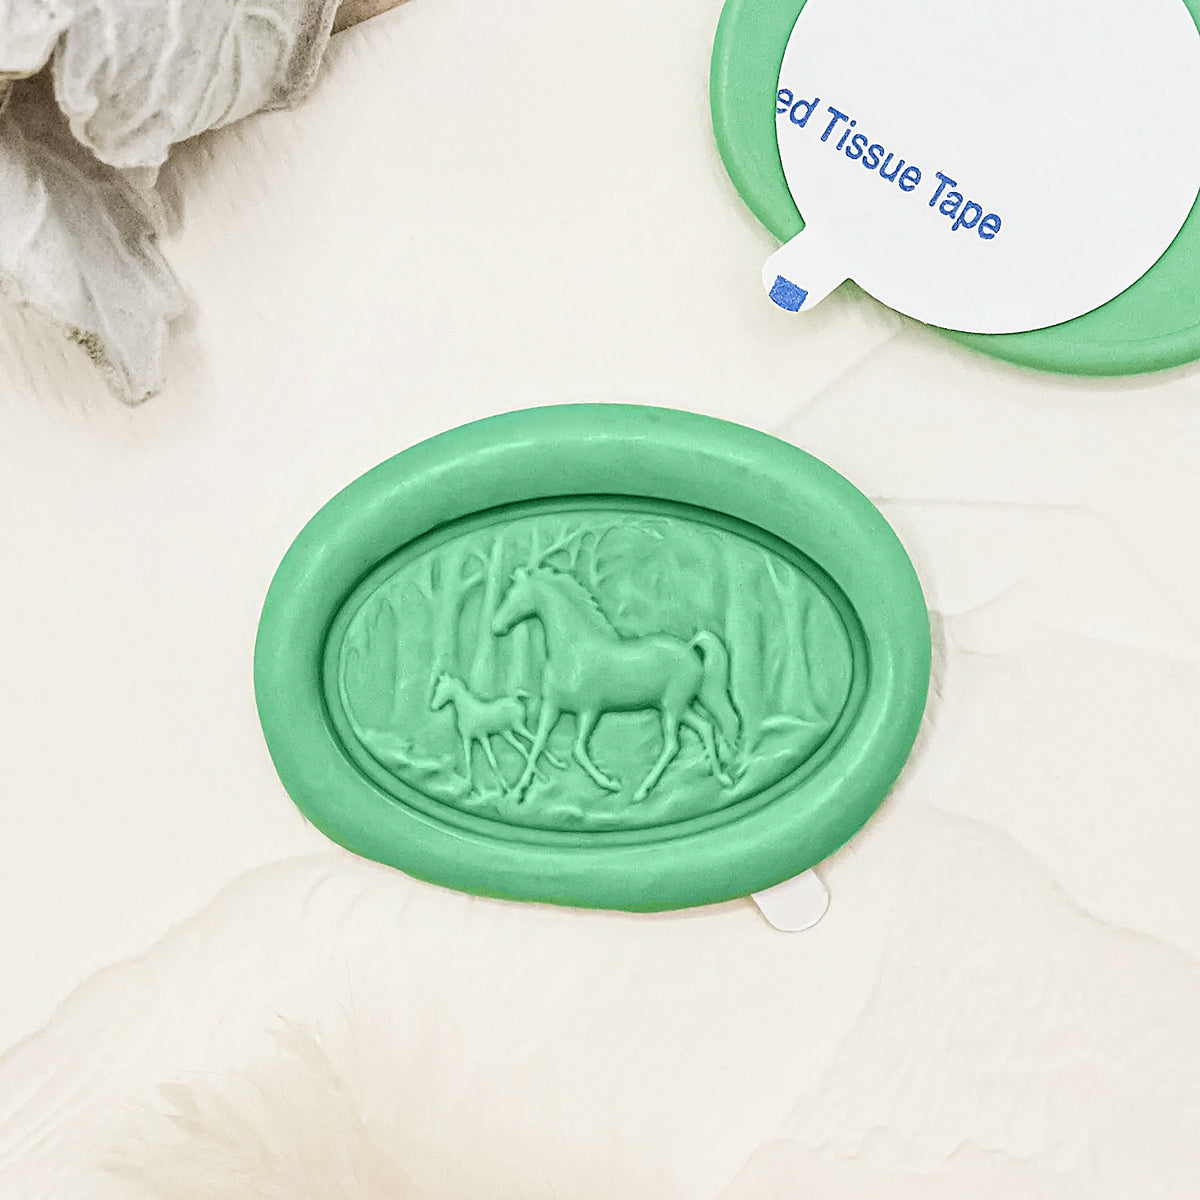 3D Relief Horse Self-adhesive Wax Seal Stickers 2-1